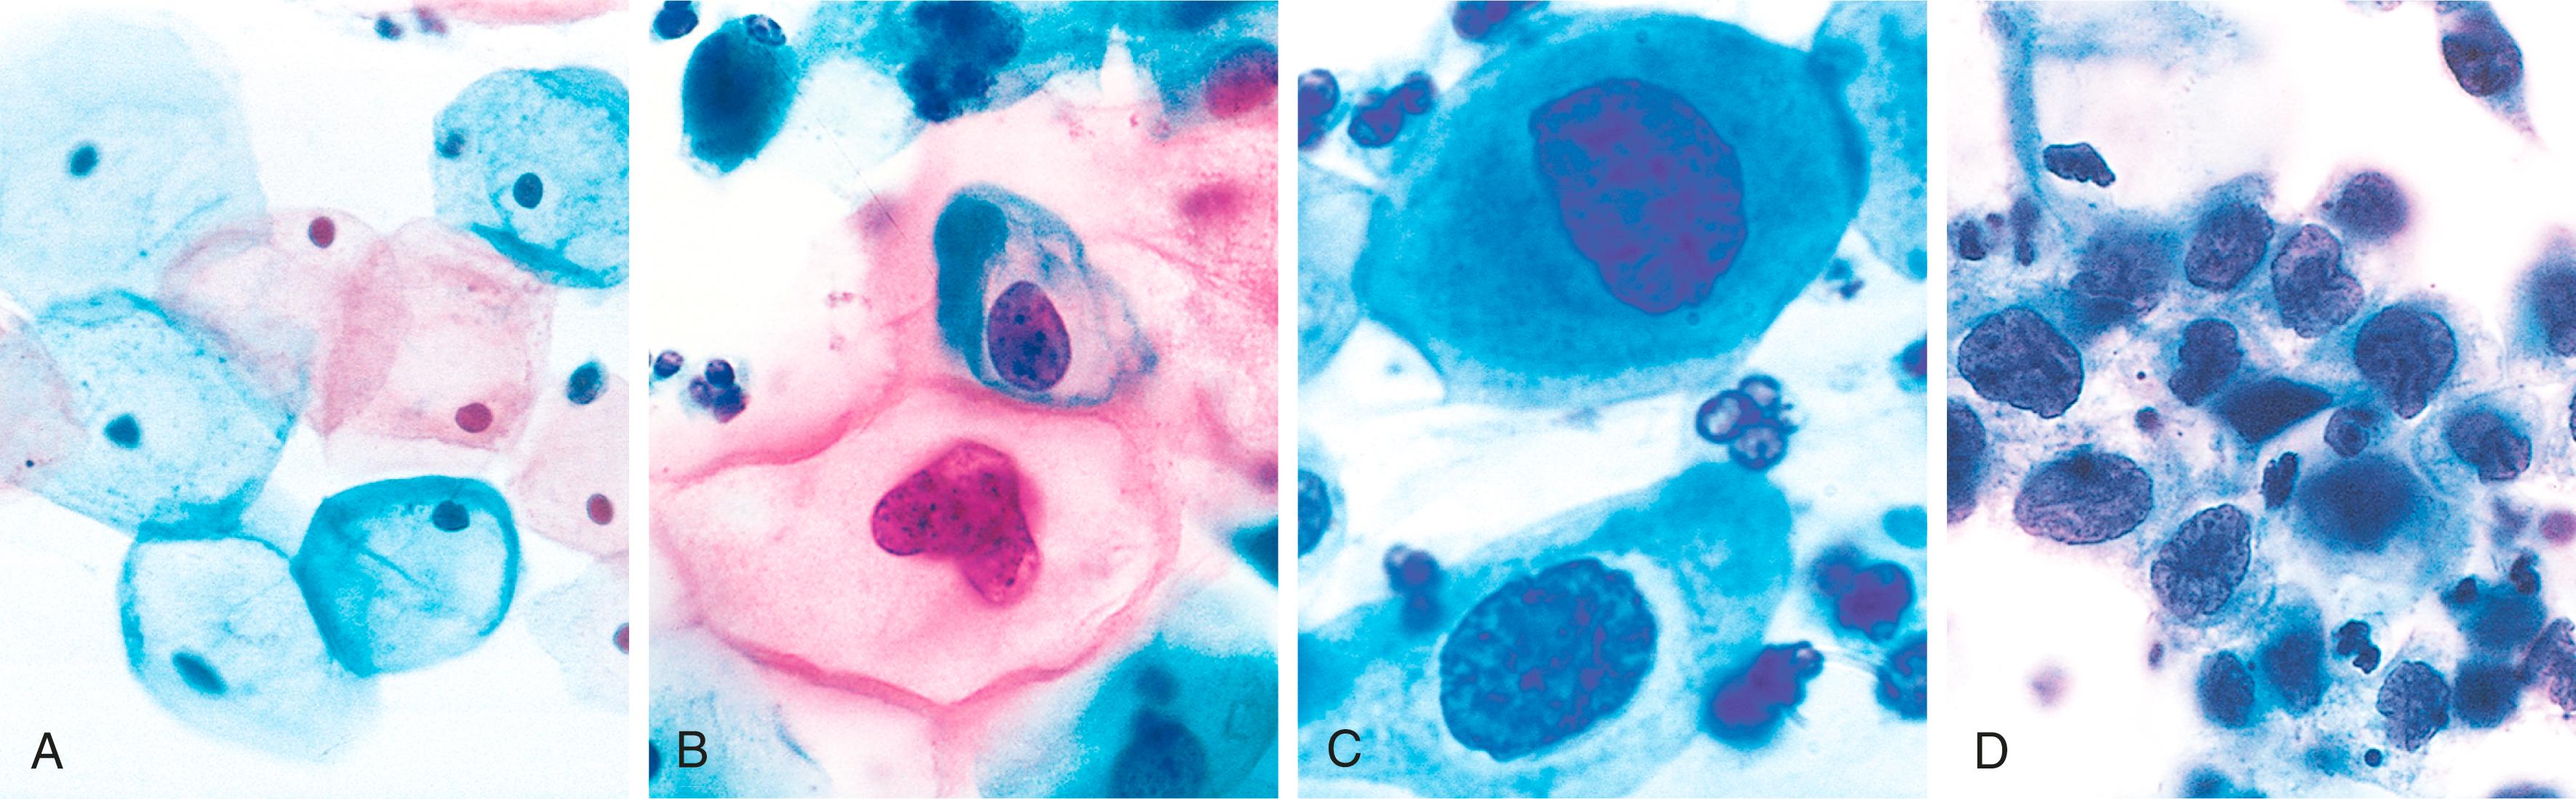 FIG. 17.7, Cytologic features of squamous intraepithelial lesion (SIL) in a Papanicolaou test. Superficial squamous cells may stain either red or blue. (A) Healthy exfoliated superficial squamous epithelial cells. (B) Low-grade squamous intraepithelial lesion (LSIL). (C and D) High-grade squamous intraepithelial lesions (HSILs). Note the reduction in cytoplasm and the increase in the nucleus-to-cytoplasm ratio as the grade of the lesion increases. This observation reflects the progressive loss of cellular differentiation on the surface of the cervical lesions from which these cells are exfoliated (see Fig. 17.6 ).